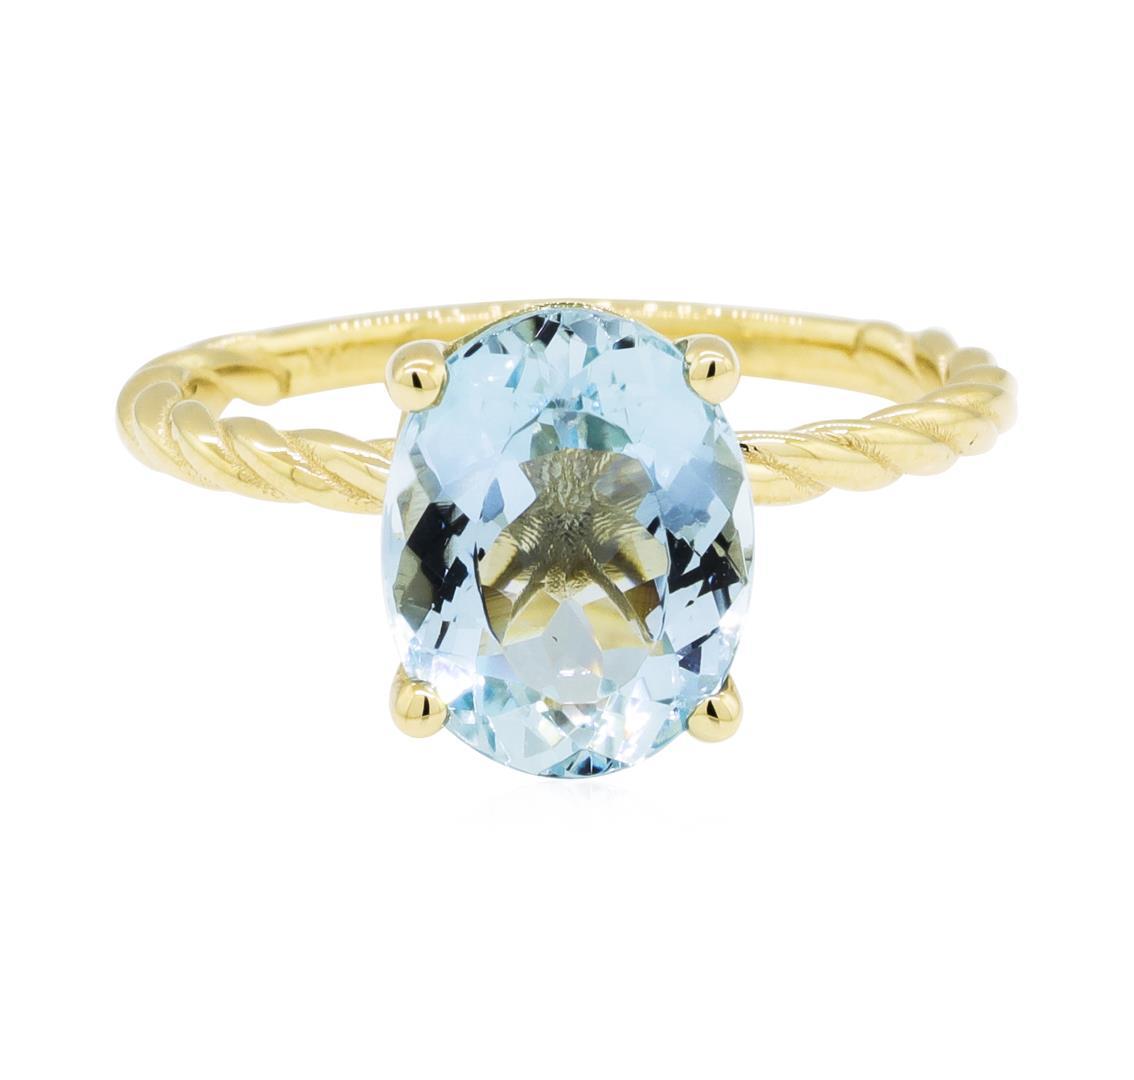 2.55 ctw Blue Topaz Ring - 14KT Yellow Gold